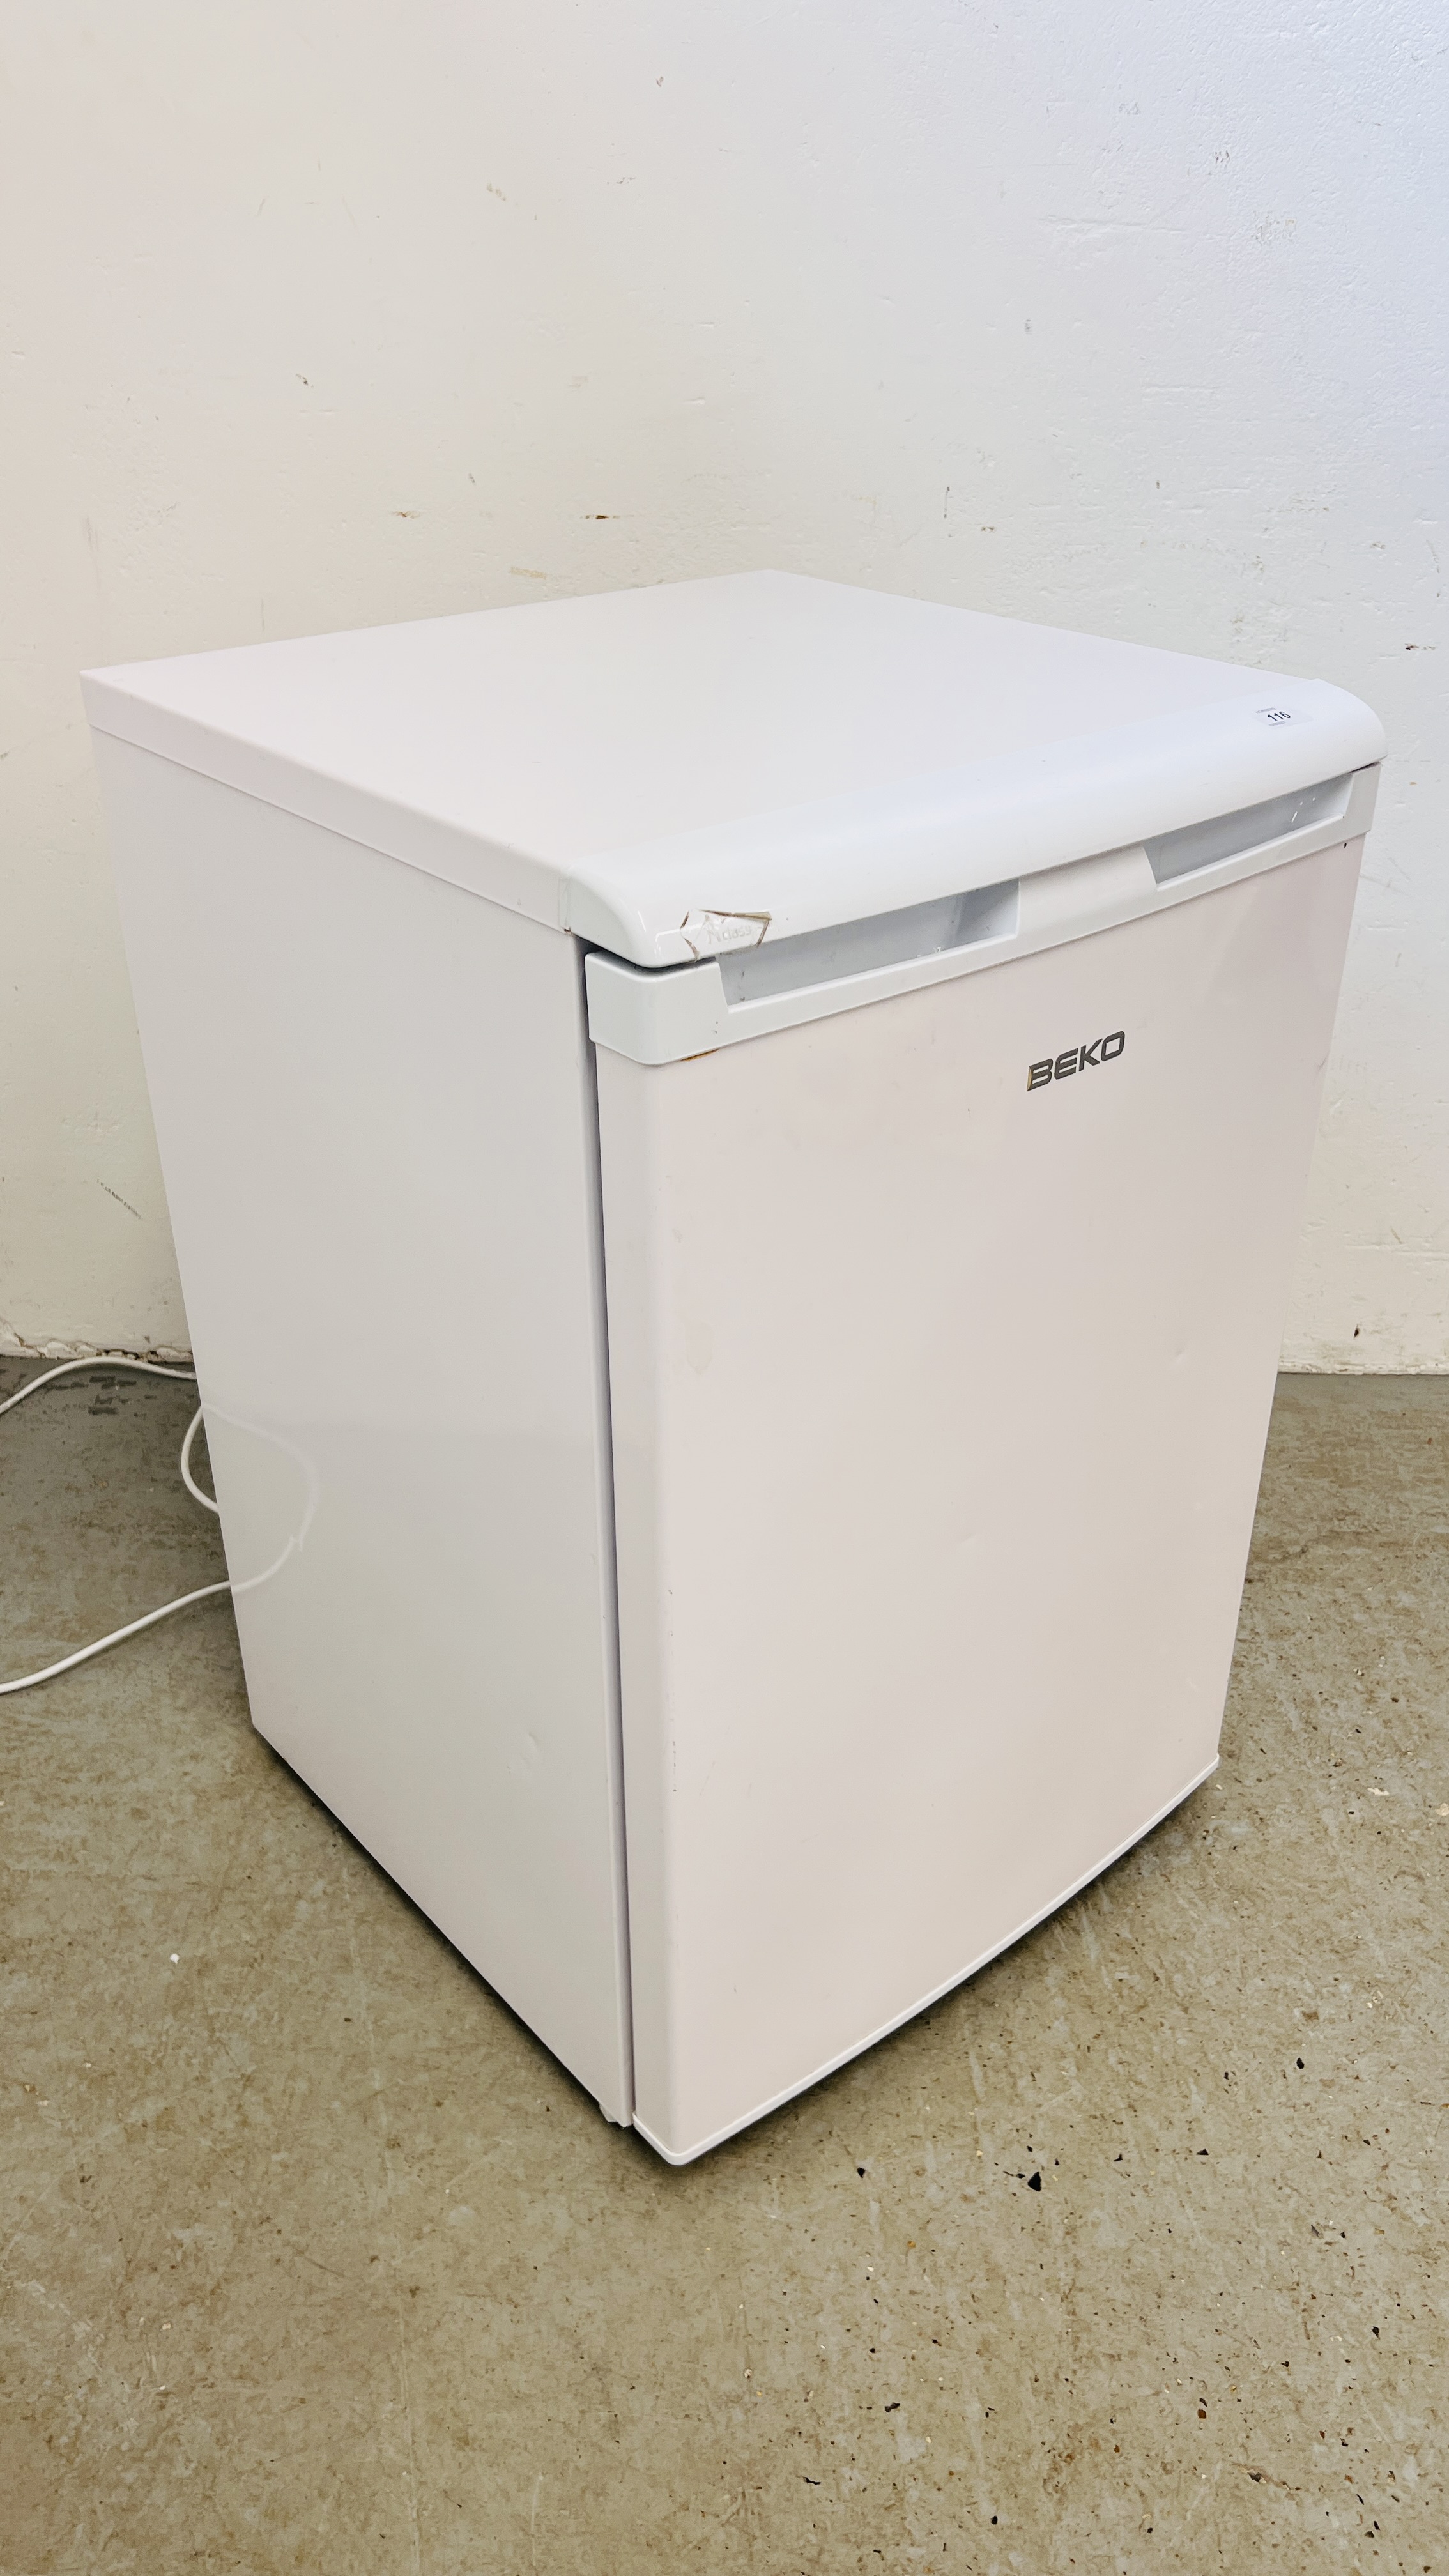 A BEKO UNDERCOUNTER FREEZER - SOLD AS SEEN. - Image 5 of 5